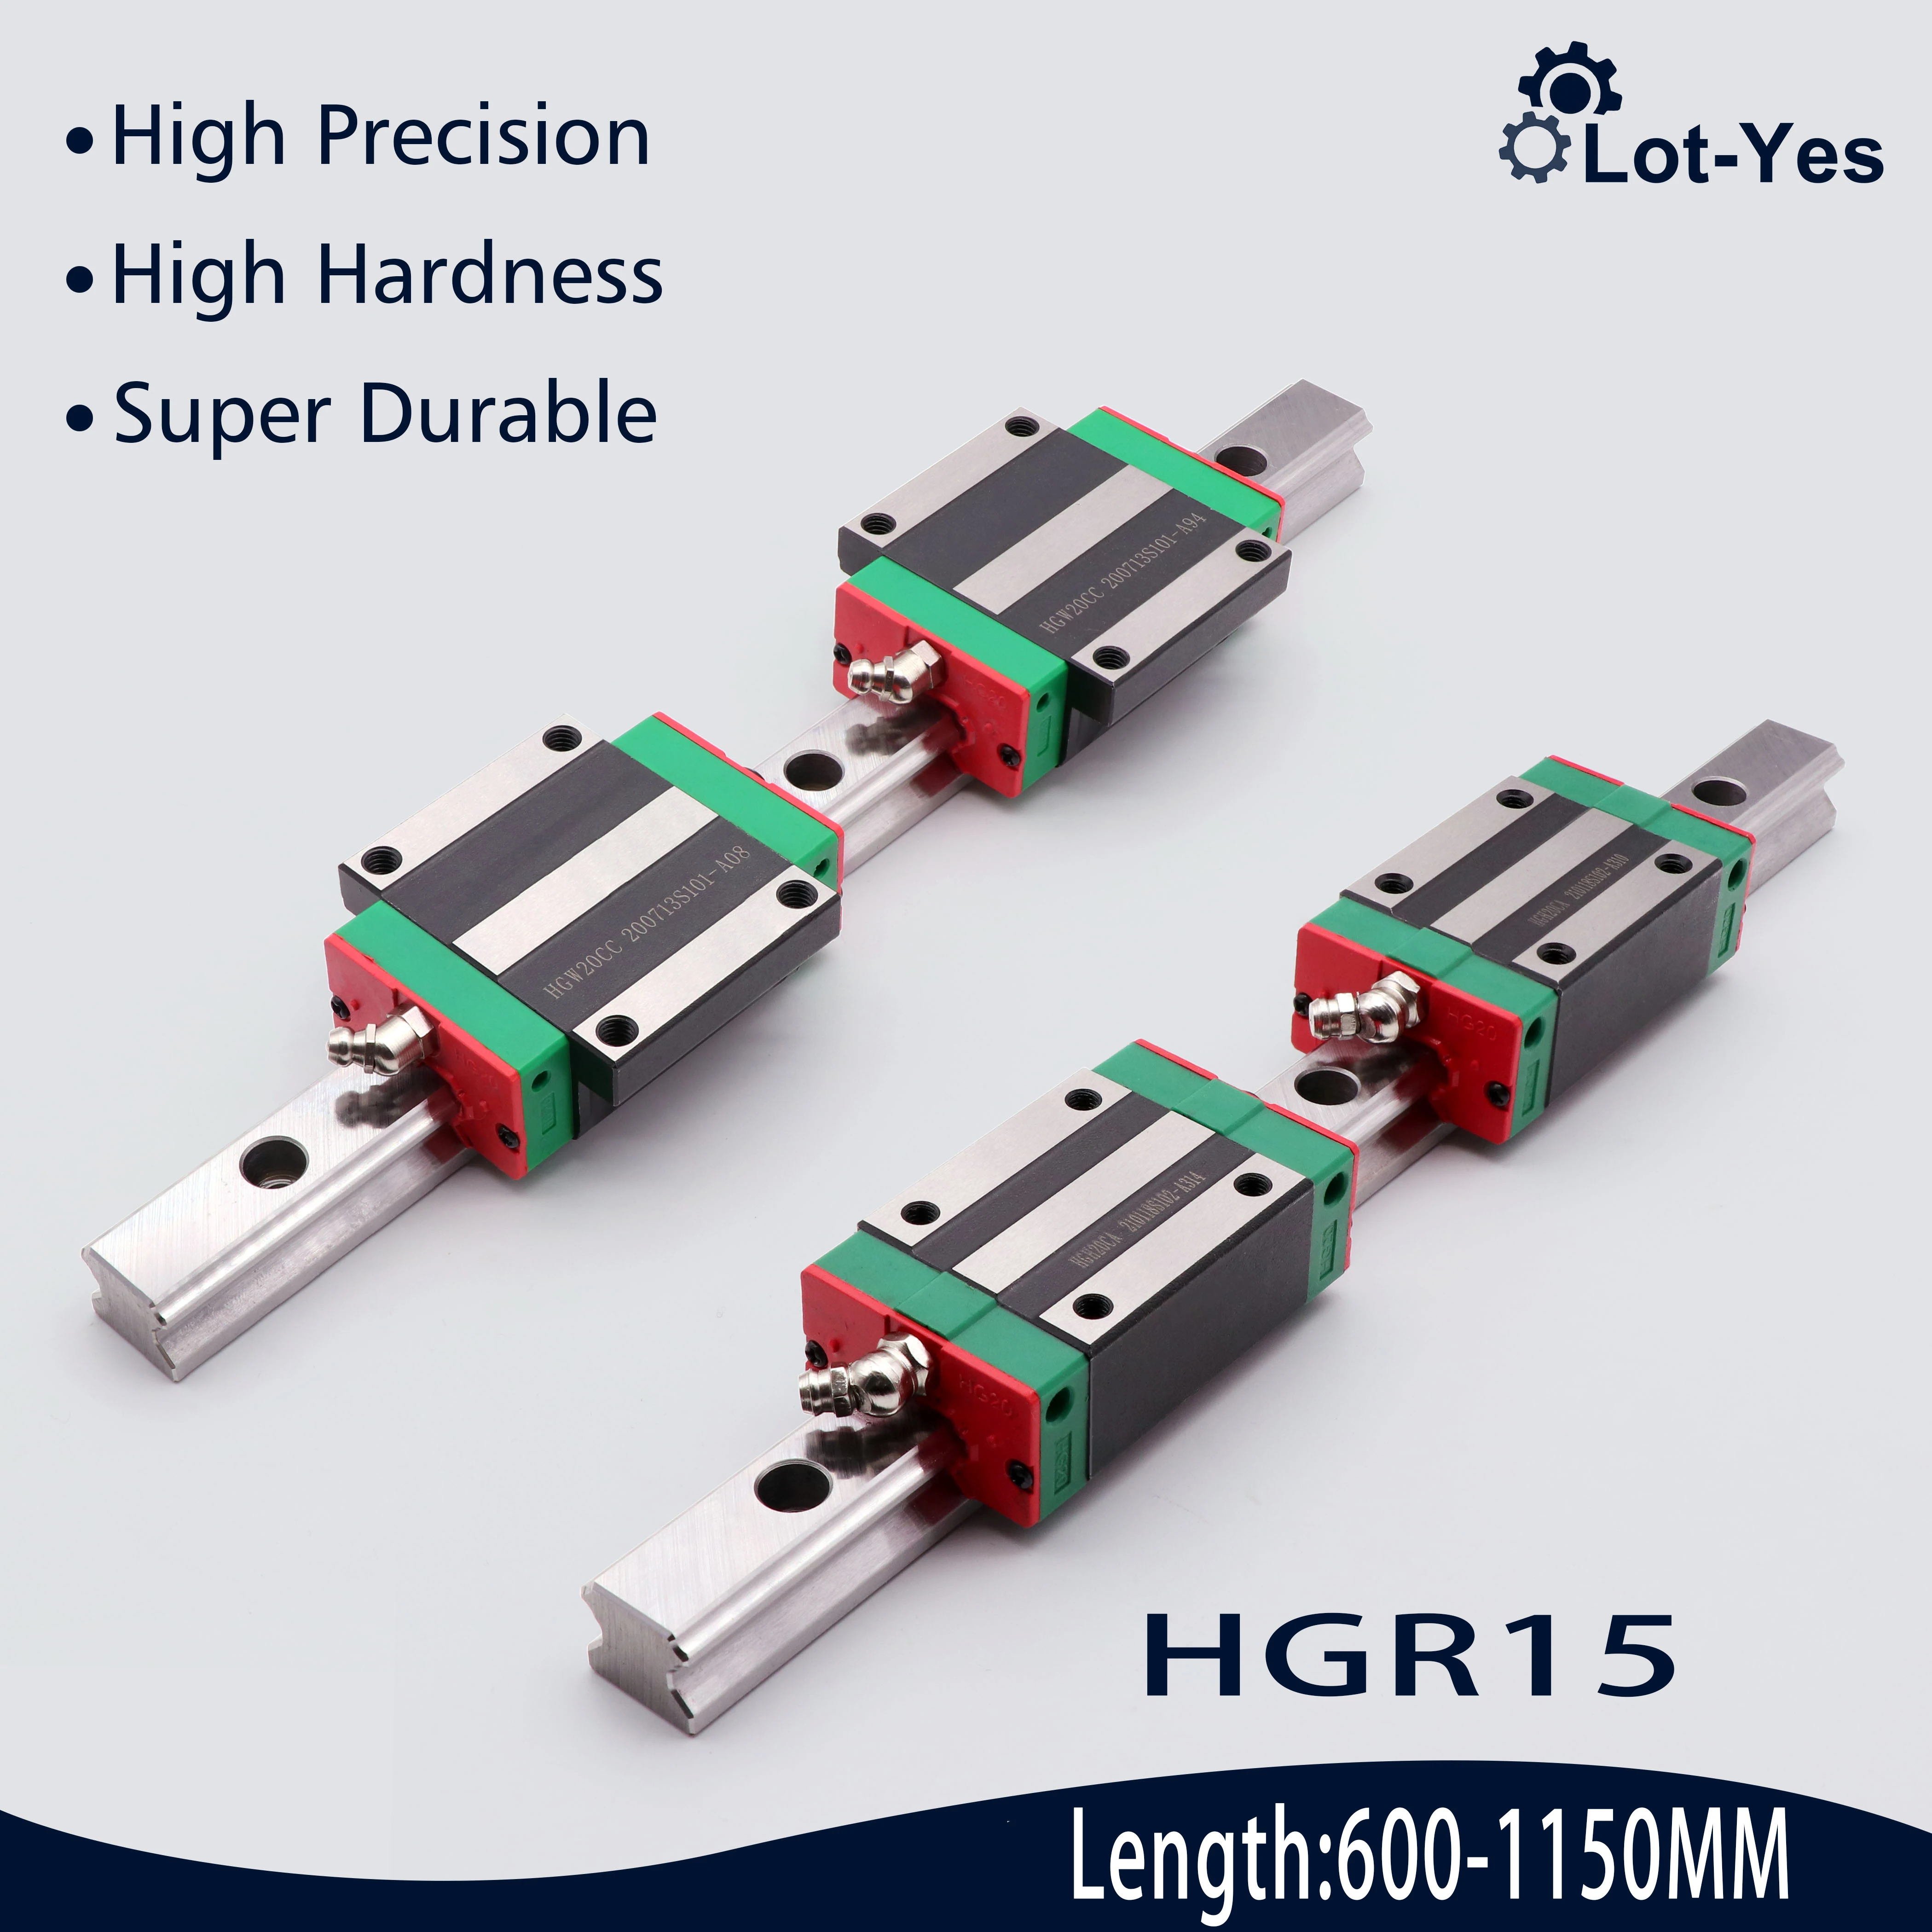 

HGR15 L: 600 - 1150 MM + HGH15CA HGW15CC Linear Guide Rails Slide Block Square Carriages For Hiwin HGR 15 CNC Router Kit